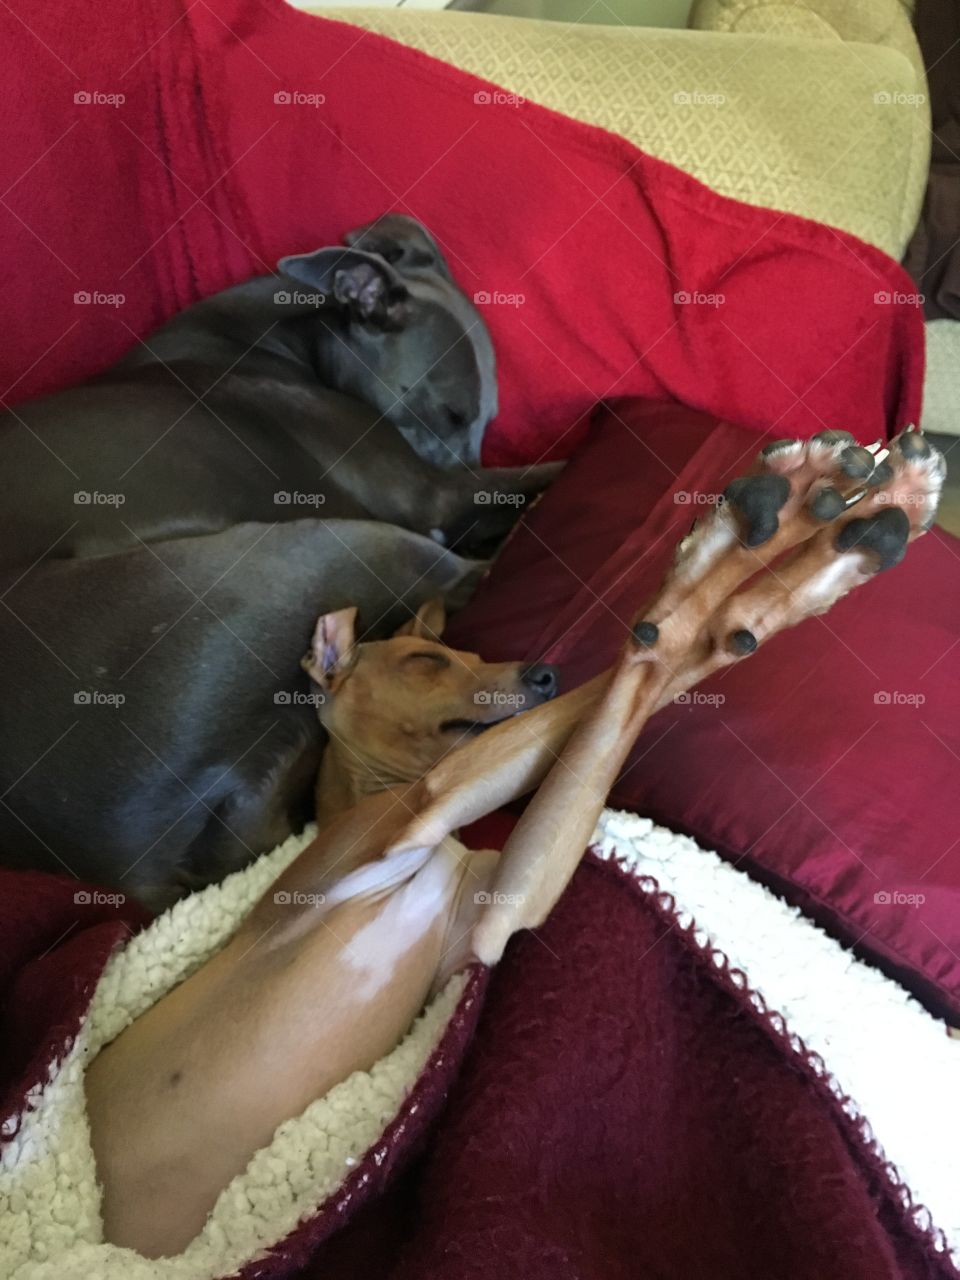 Italian greyhound puppy asleep with her legs crossed in the air next to a sleeping whippet on the sofa